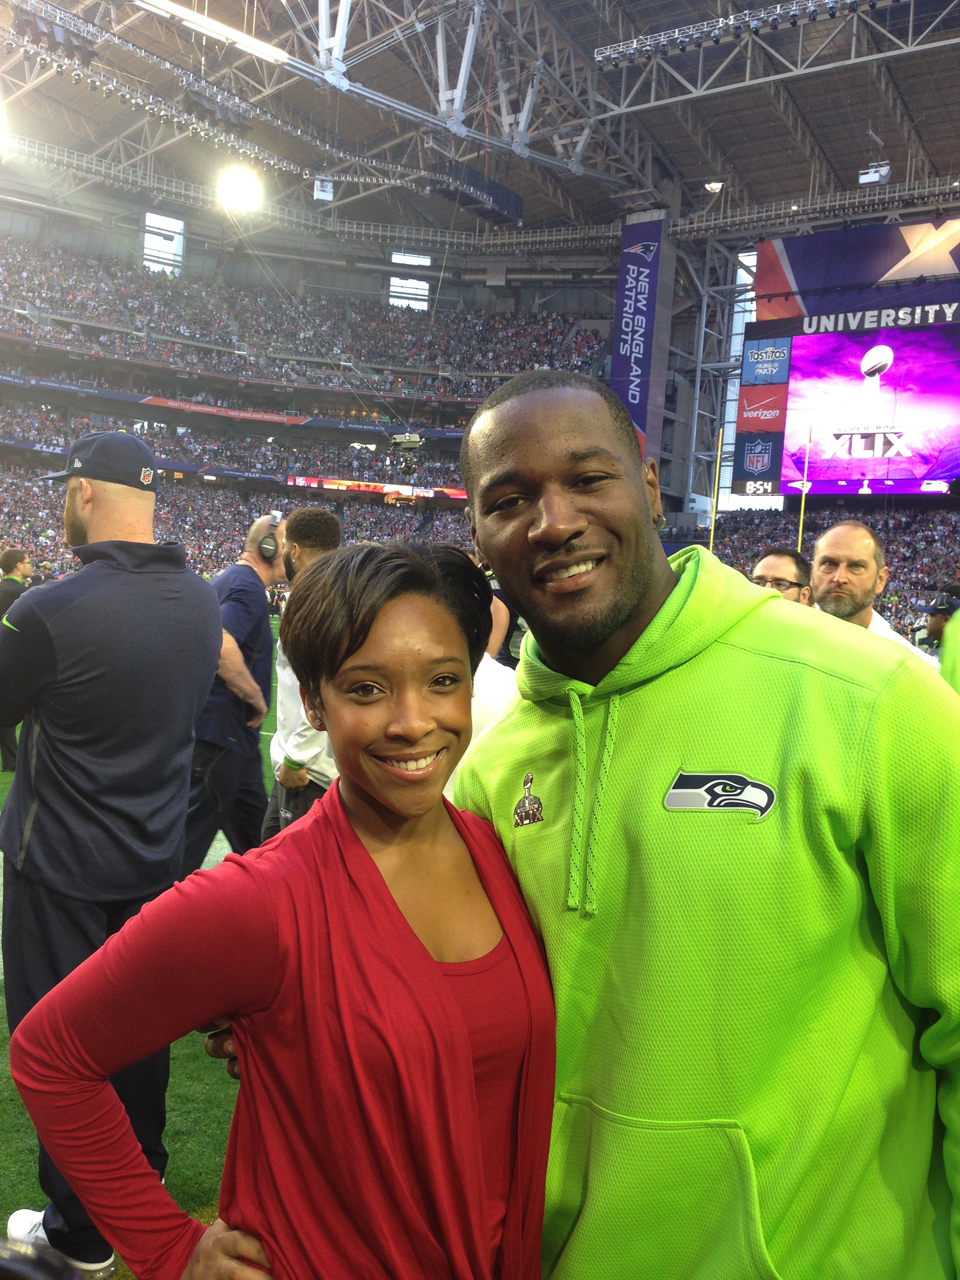 Treshelle and Seahawks player.